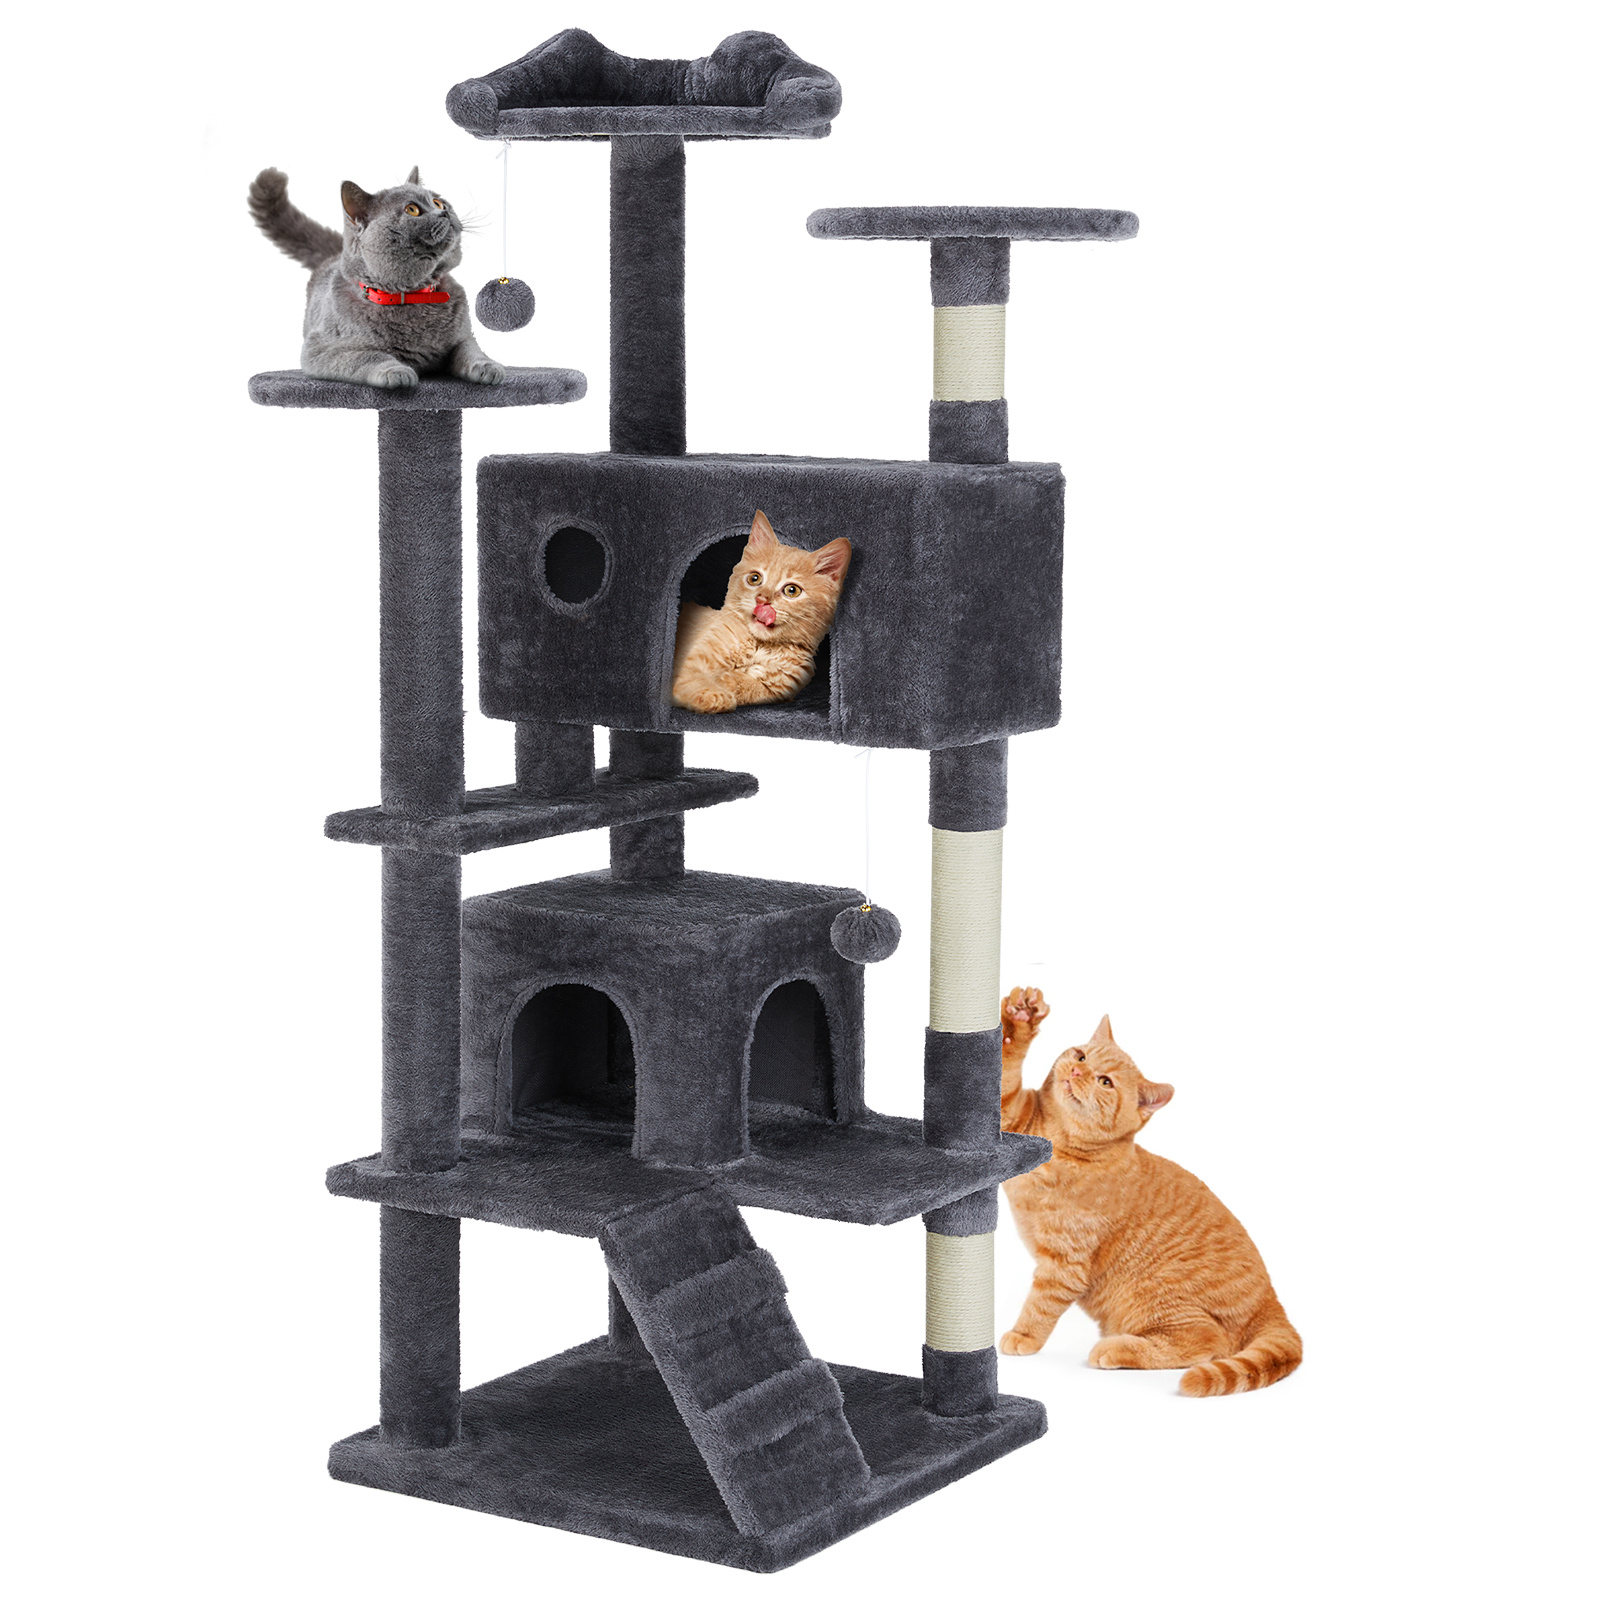 

54in Multi-level Cat Tree, Indoor Cats Tall Tower, With Large Condo, Natural Sisal Scratching Post, Easy Climbing Ladder, Dangling Toy For Kitty, Kitten